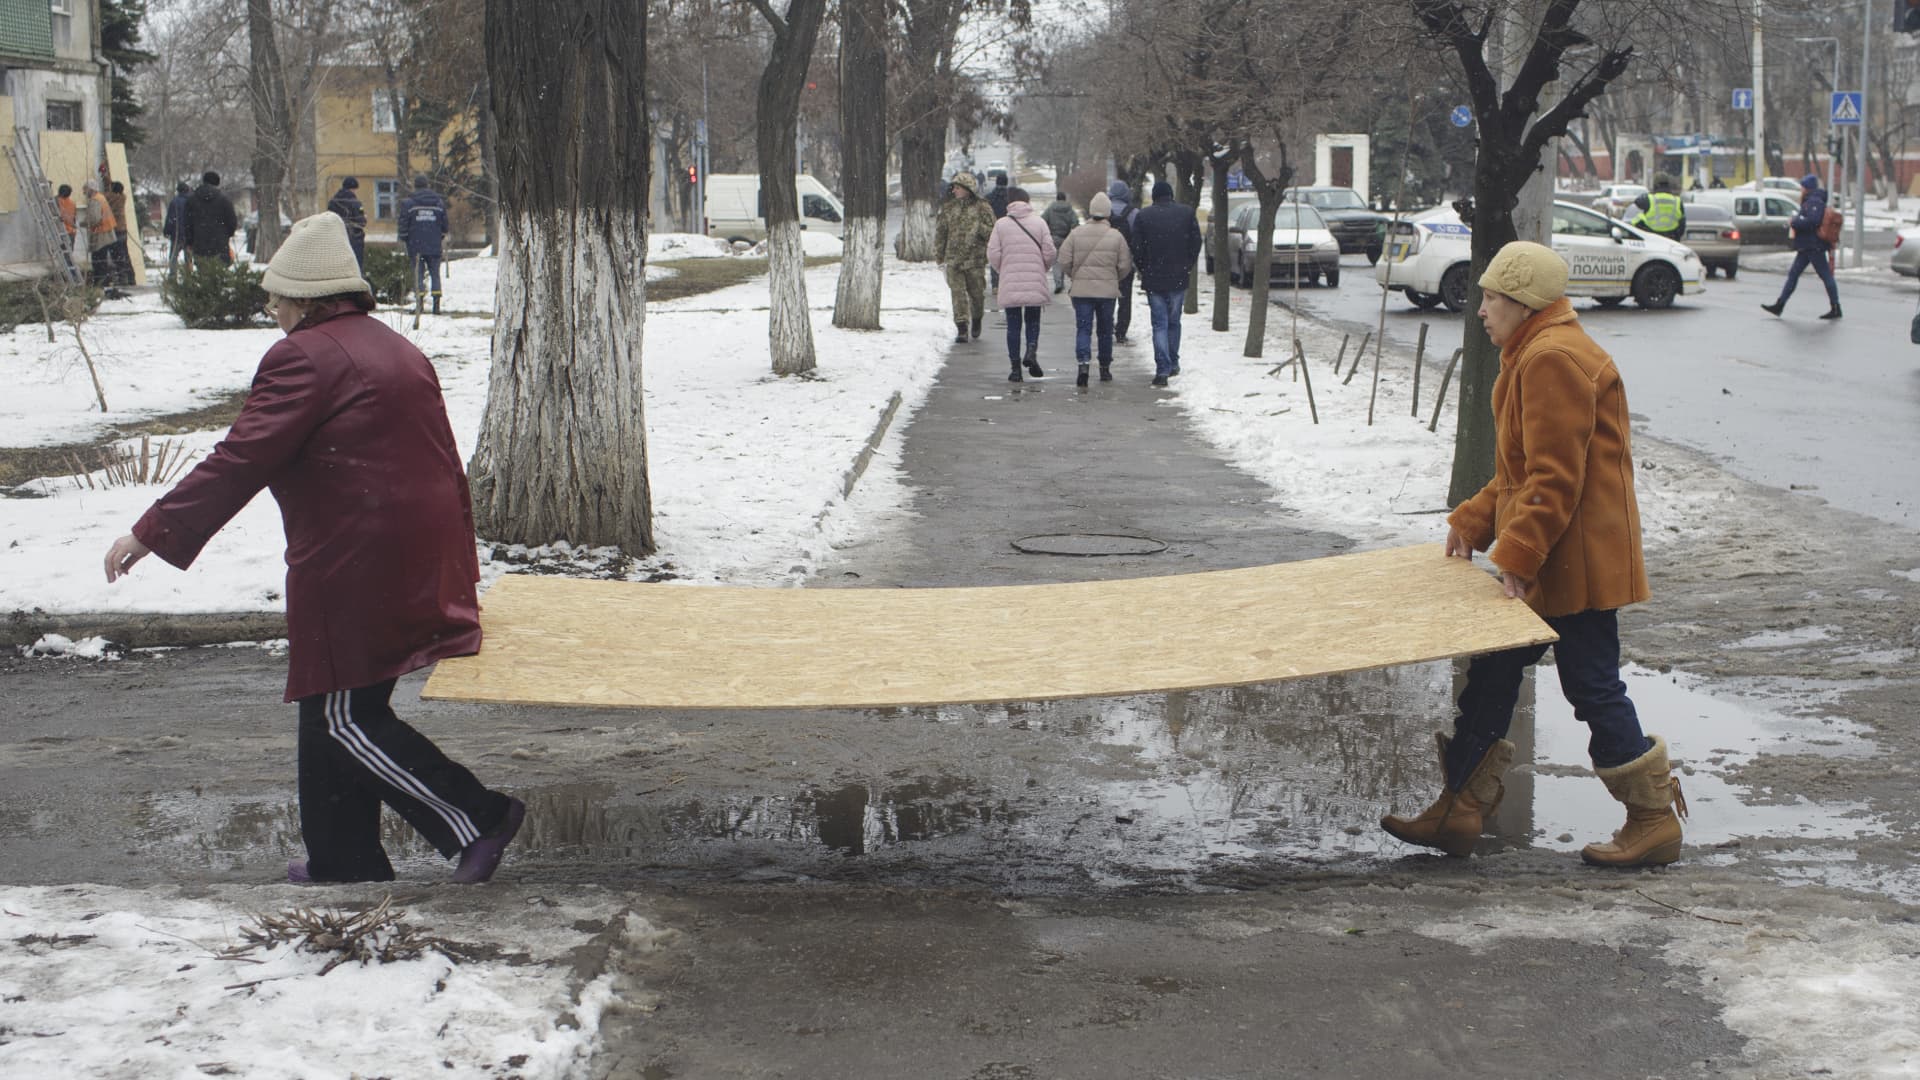 Citizens carry piece of wood which will use to repair their house damaged in the attack after a Russian missile strike in Kramatorsk, Donetsk Oblast, Ukraine on February 02, 2023. 